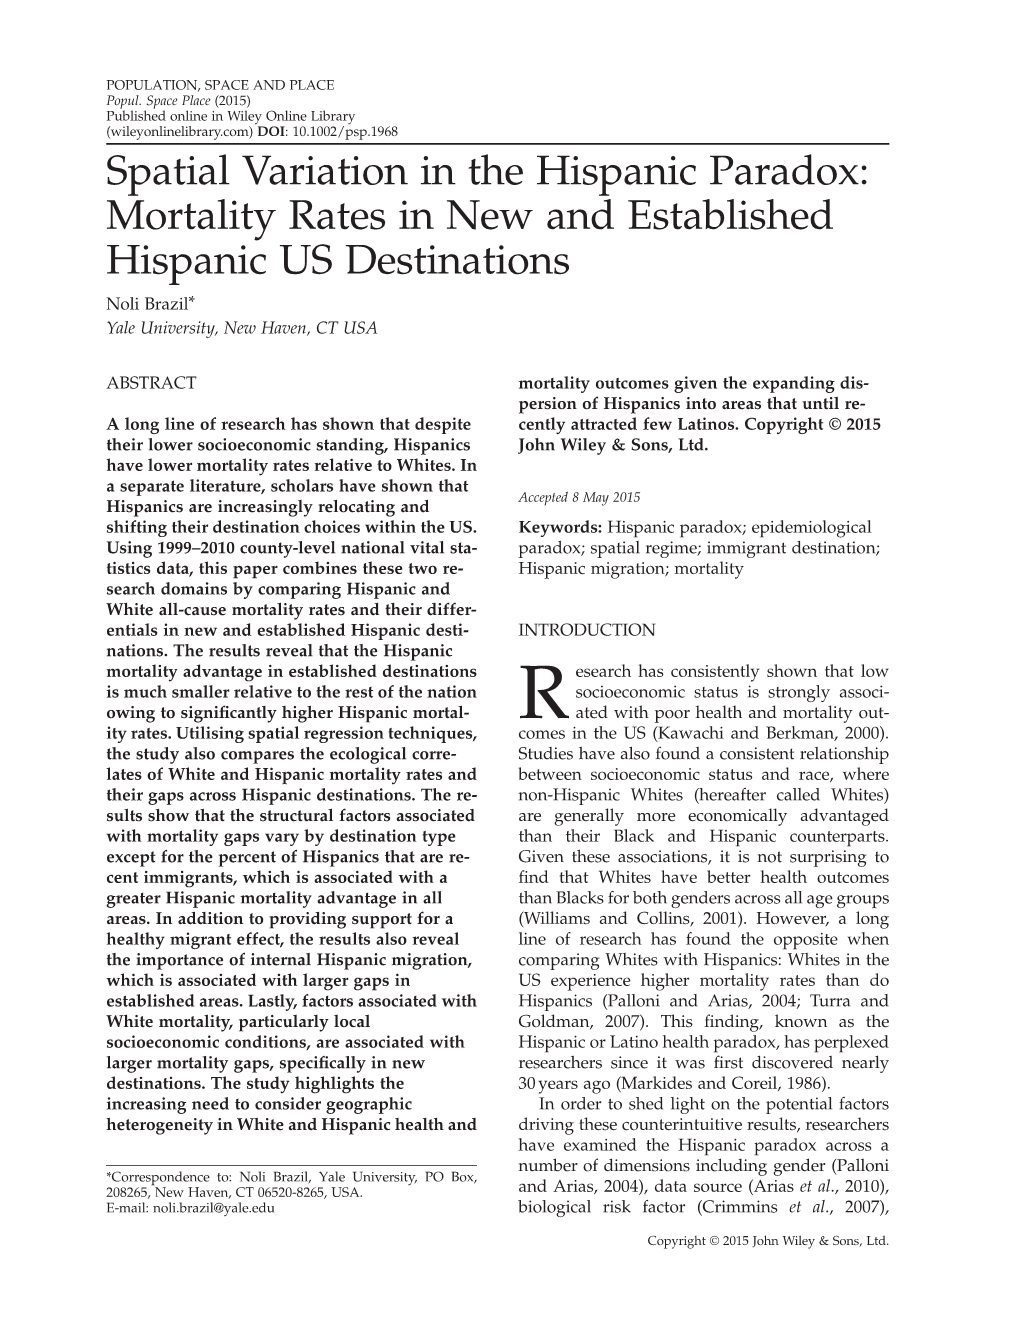 Spatial Variation in the Hispanic Paradox: Mortality Rates in New and Established Hispanic US Destinations Noli Brazil* Yale University, New Haven, CT USA